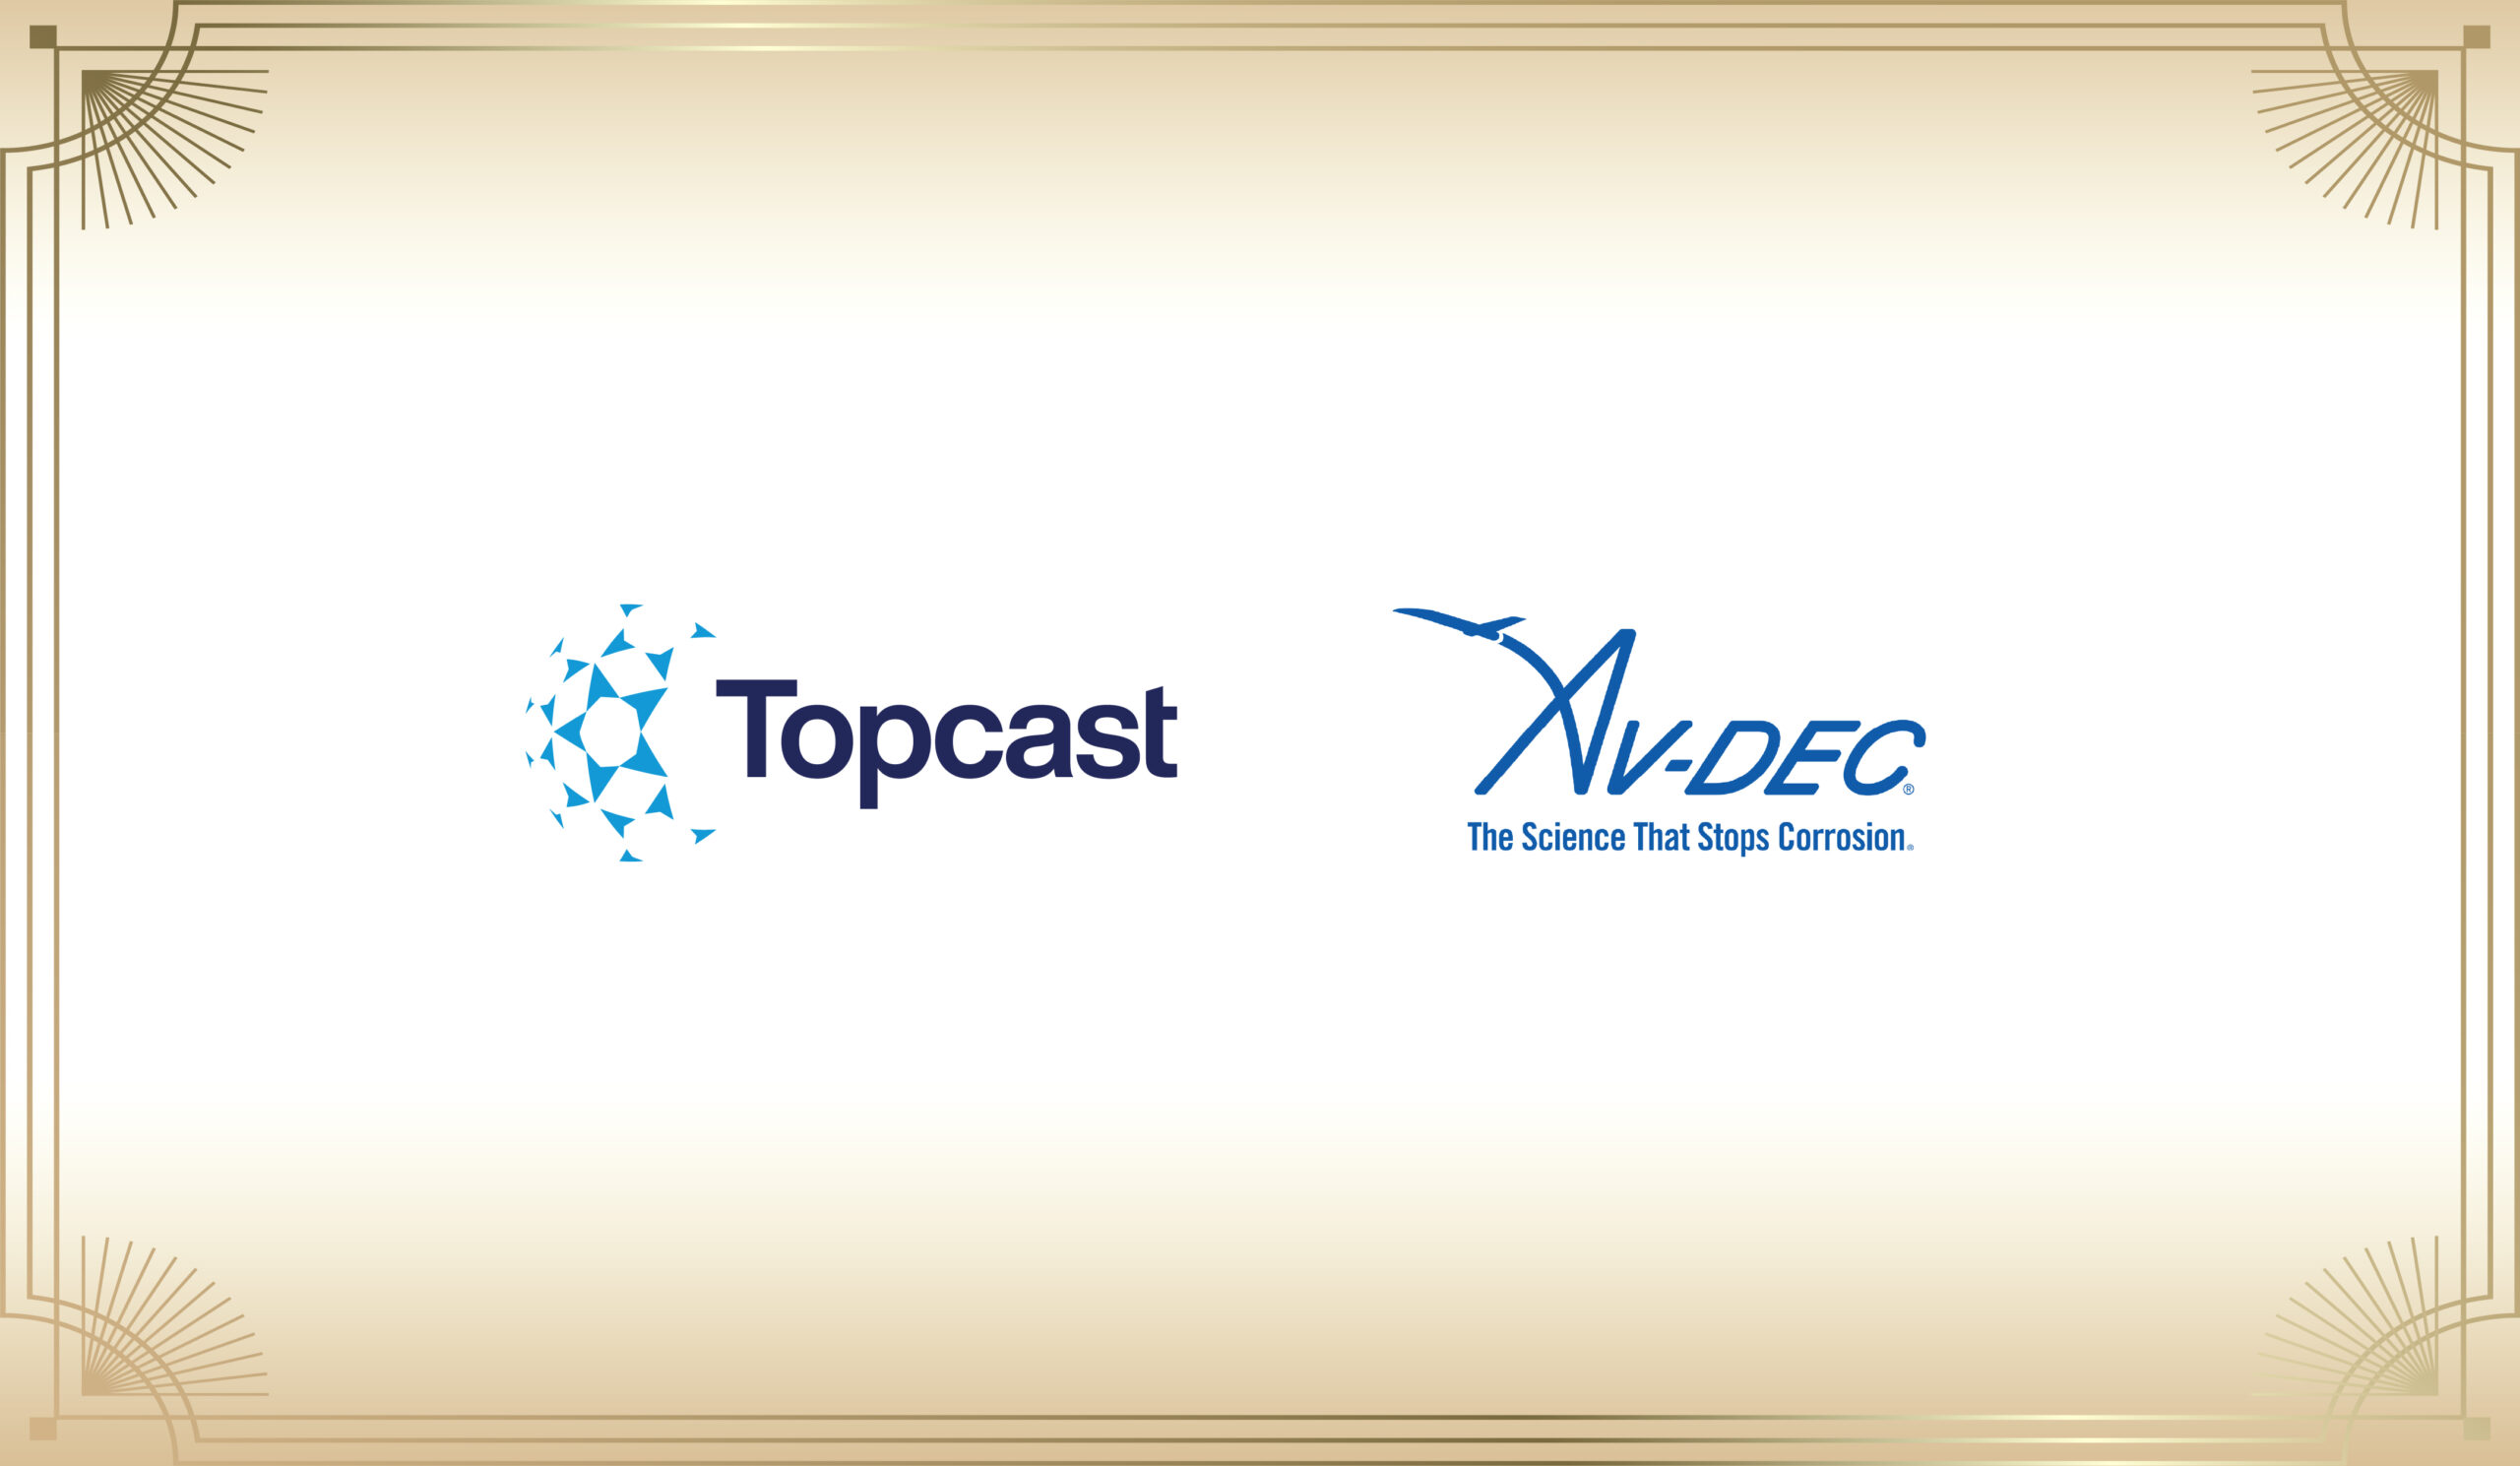 Topcast and Av-DEC Extend Exclusive Distribution Partnership to Asia-Pacific Military Customers